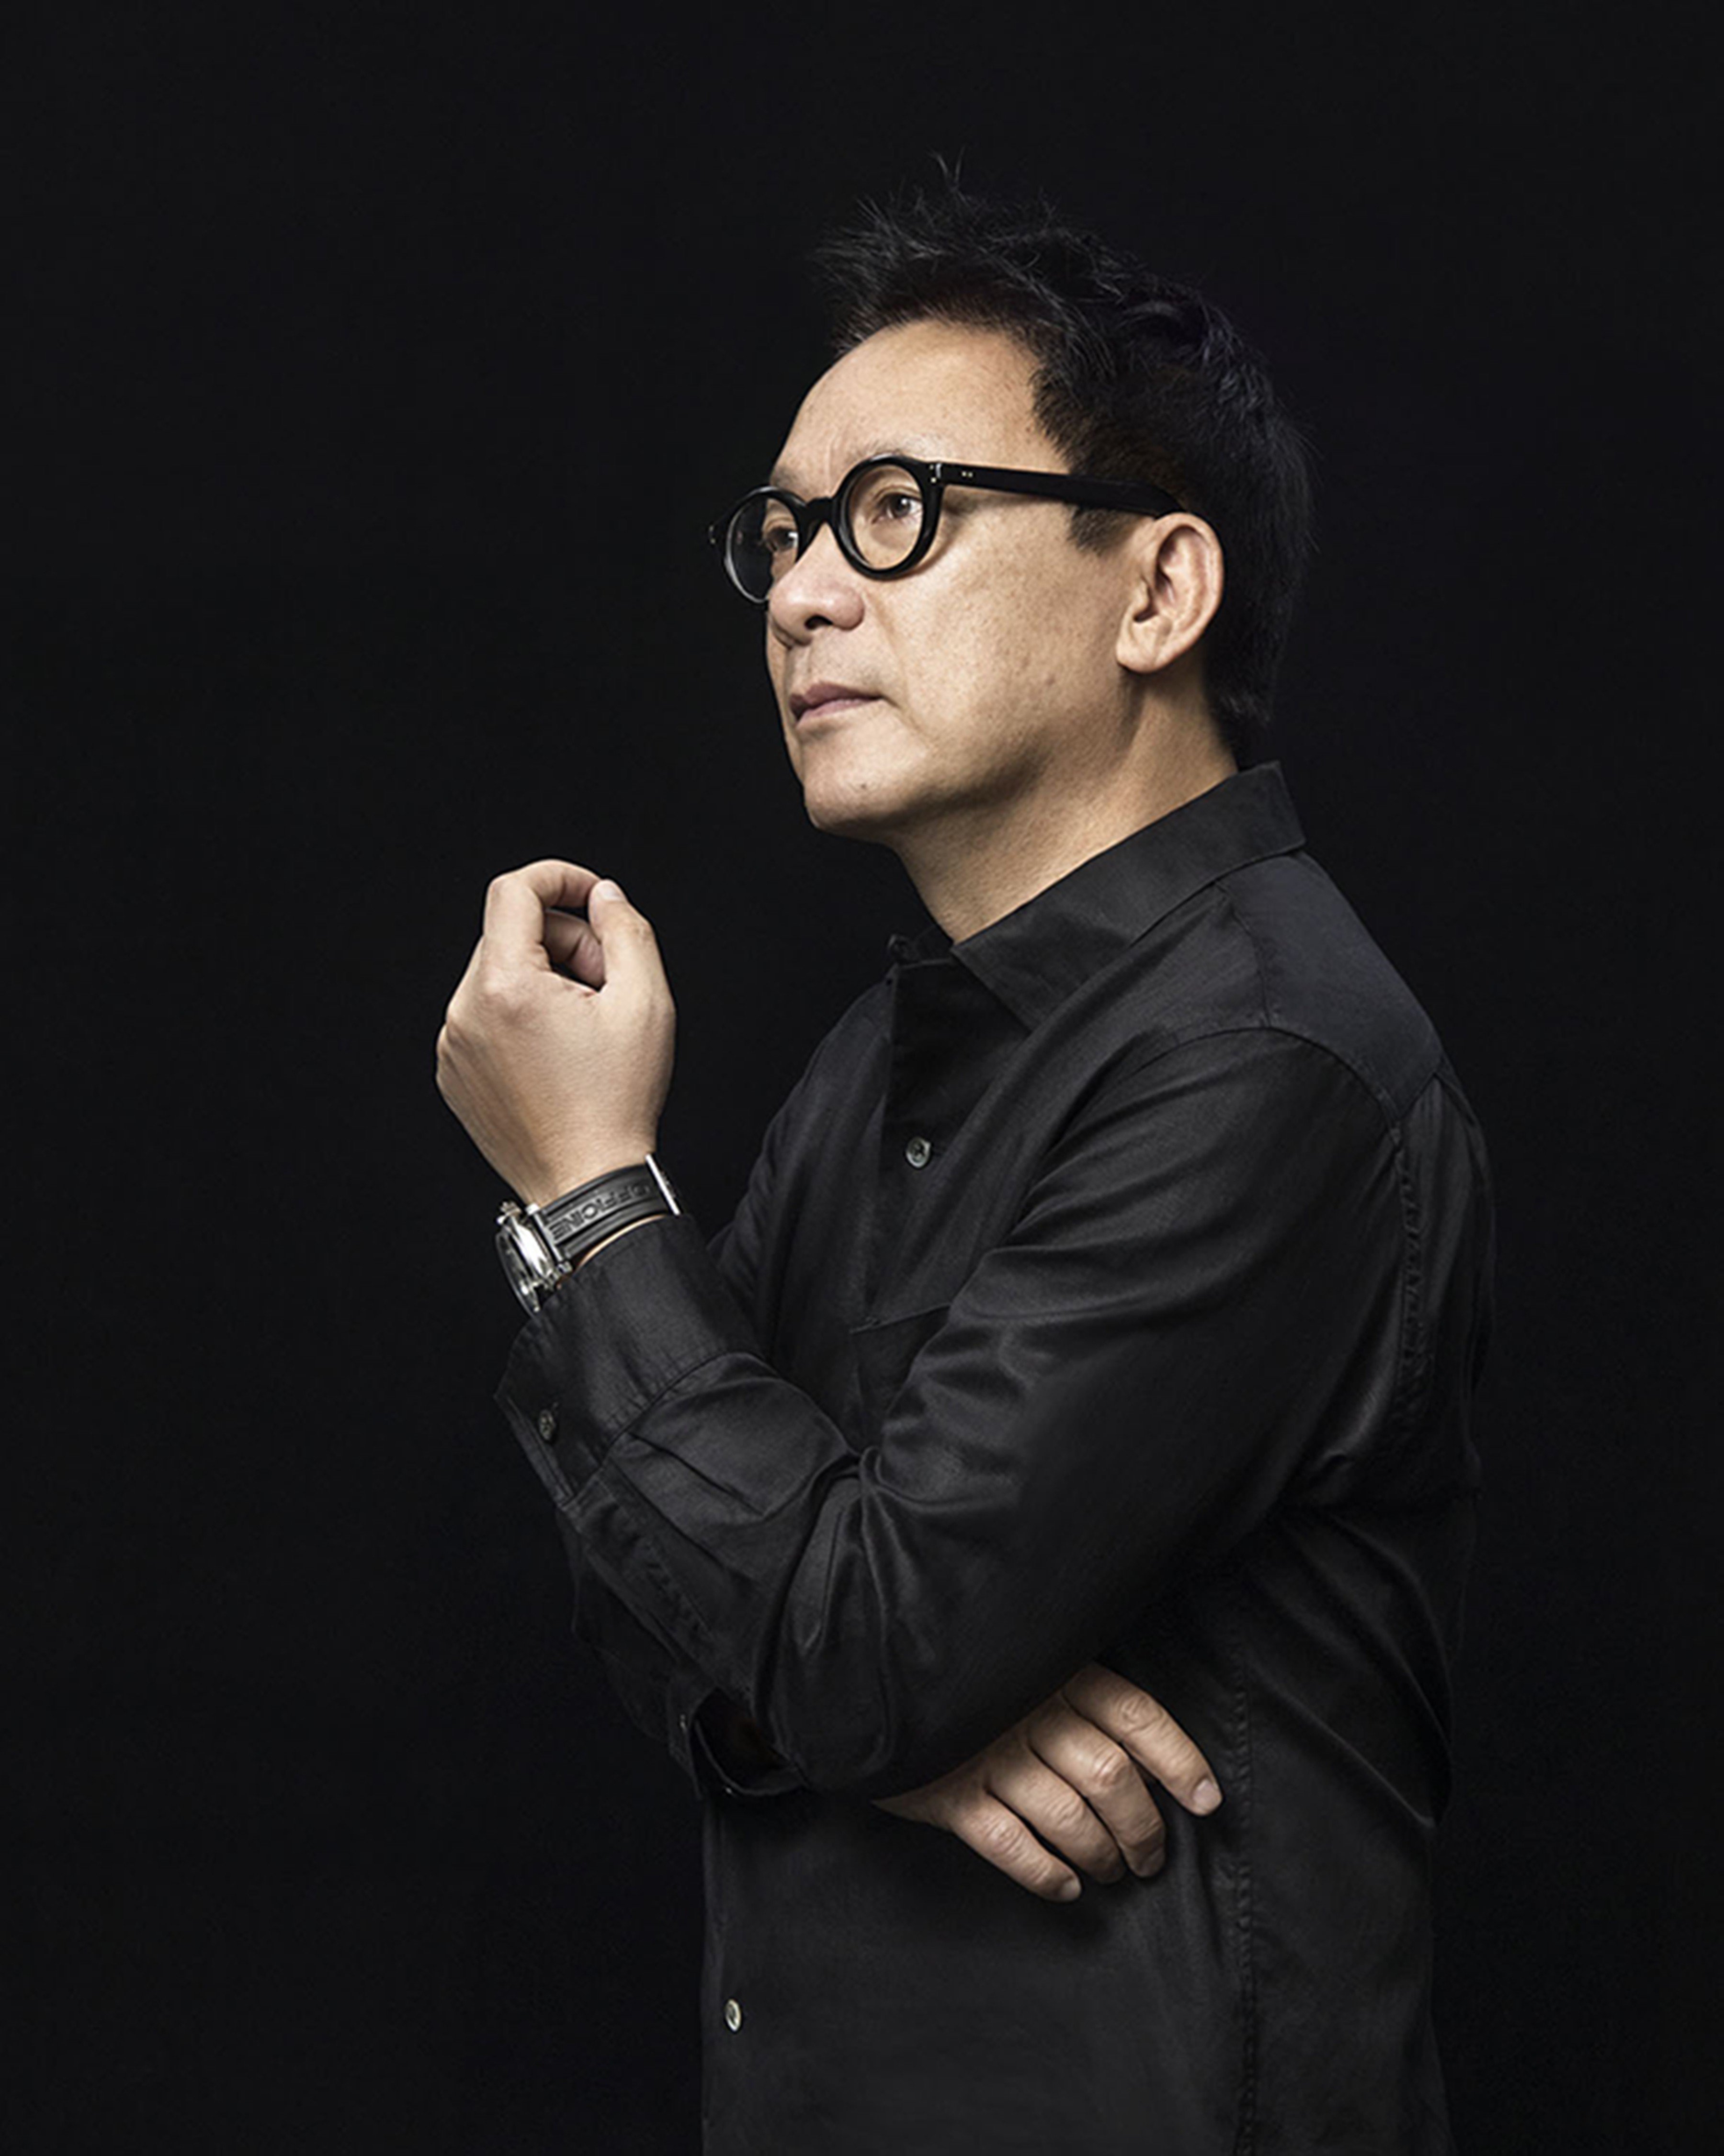 Steve Leung, founder of Steve Leung Designers, is a leading architect, interior and product designer in Hong Kong.